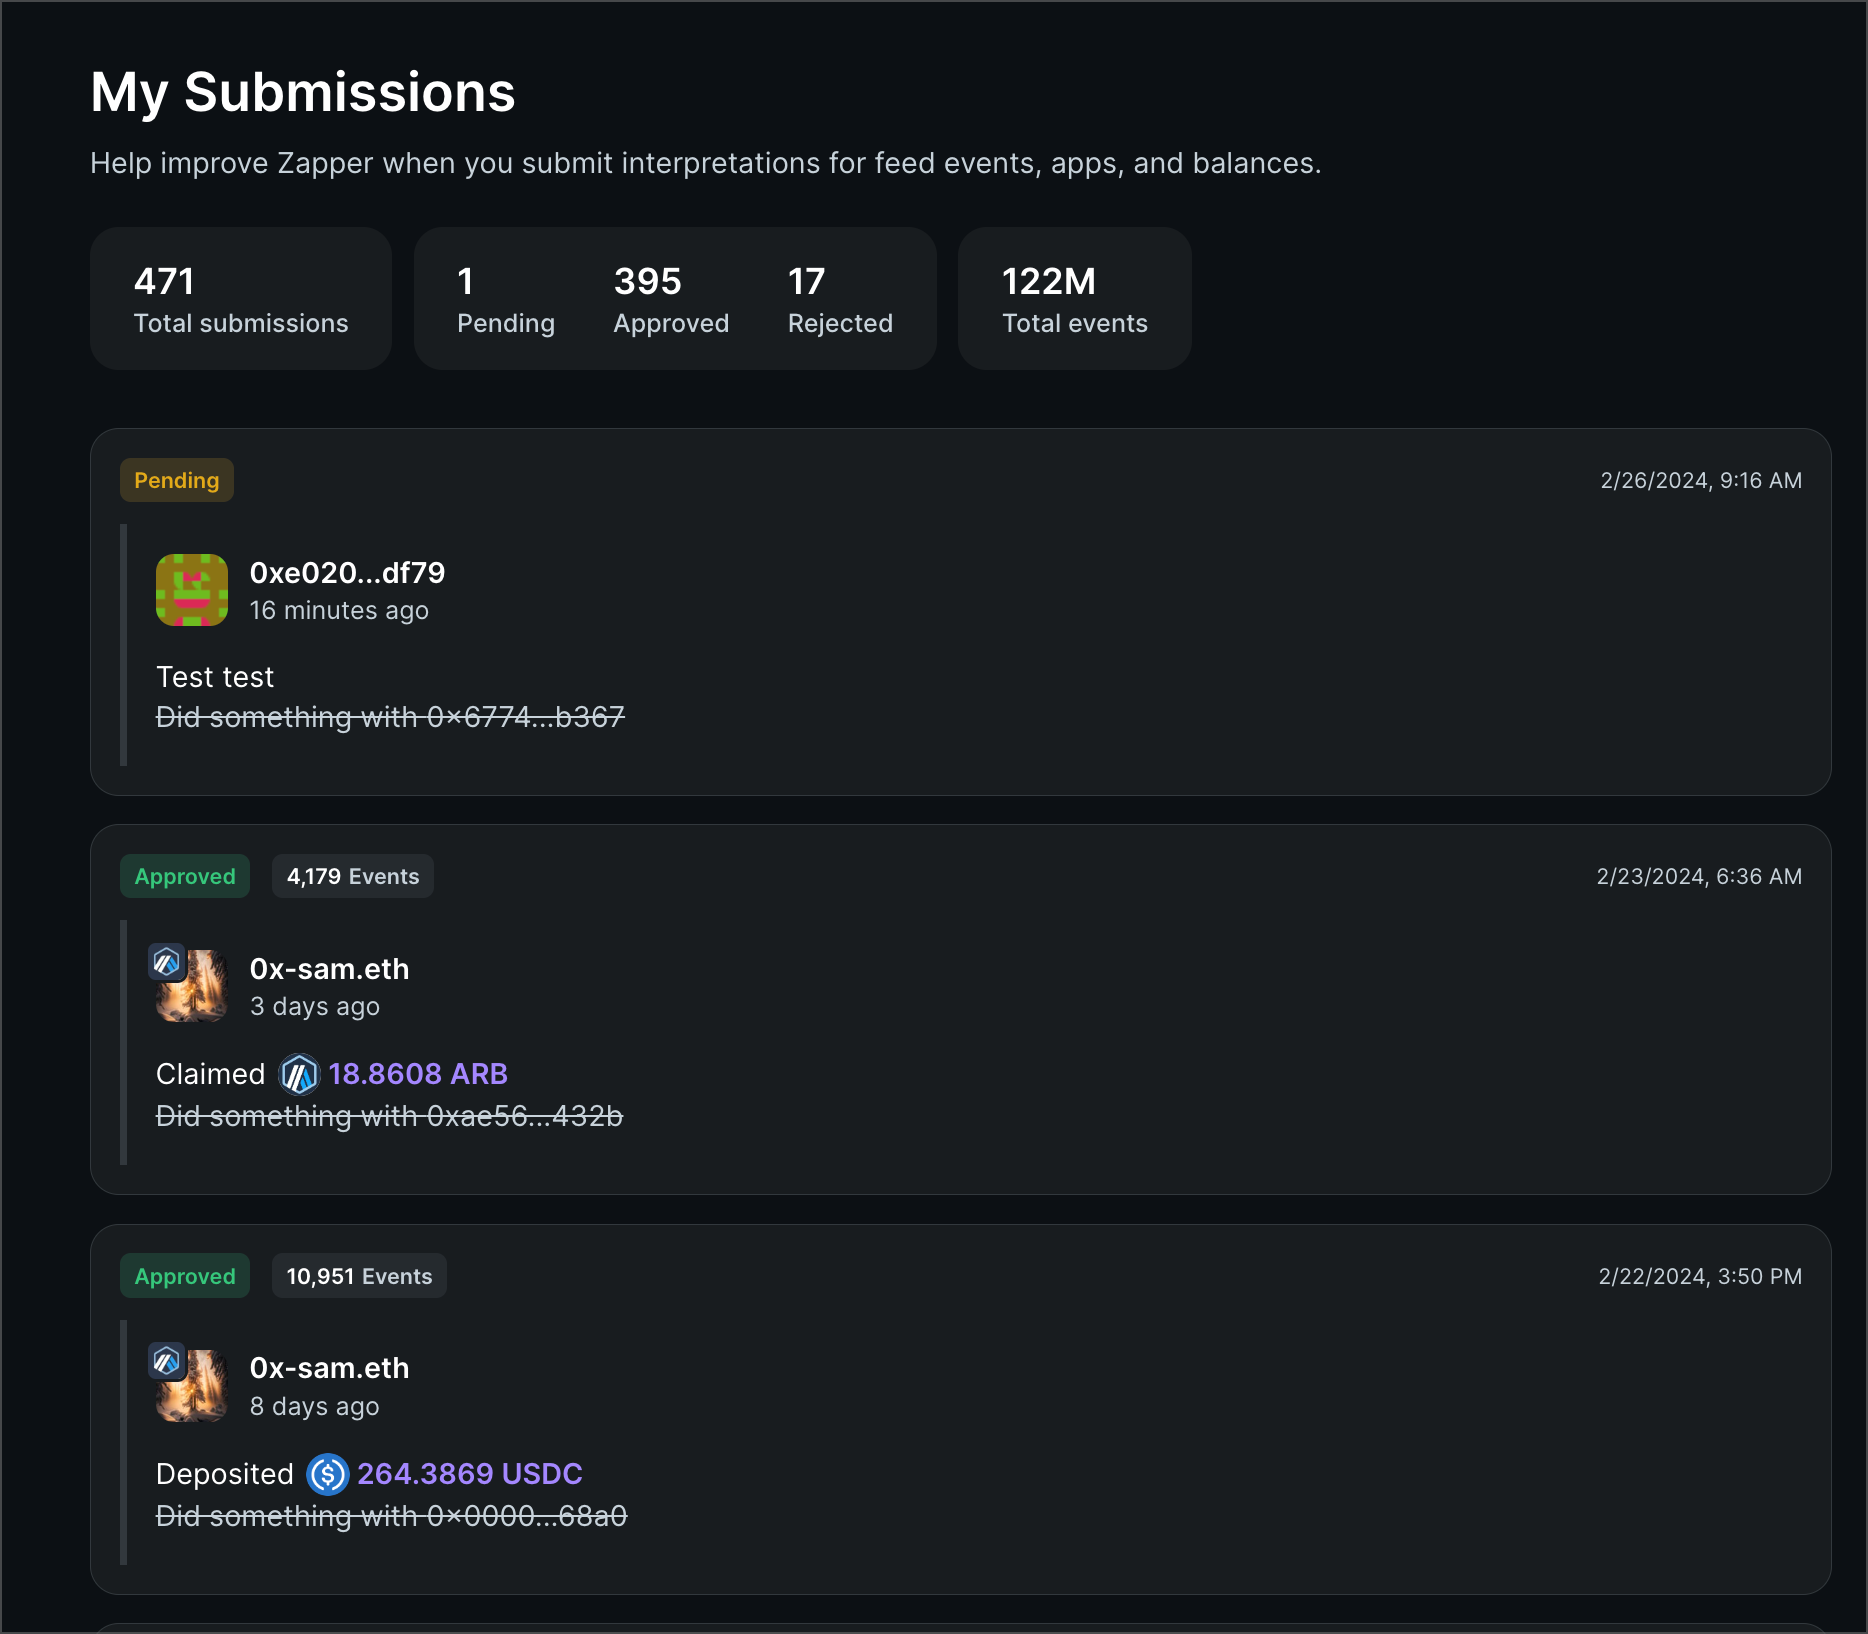 Example of what the My Submissions page looks like